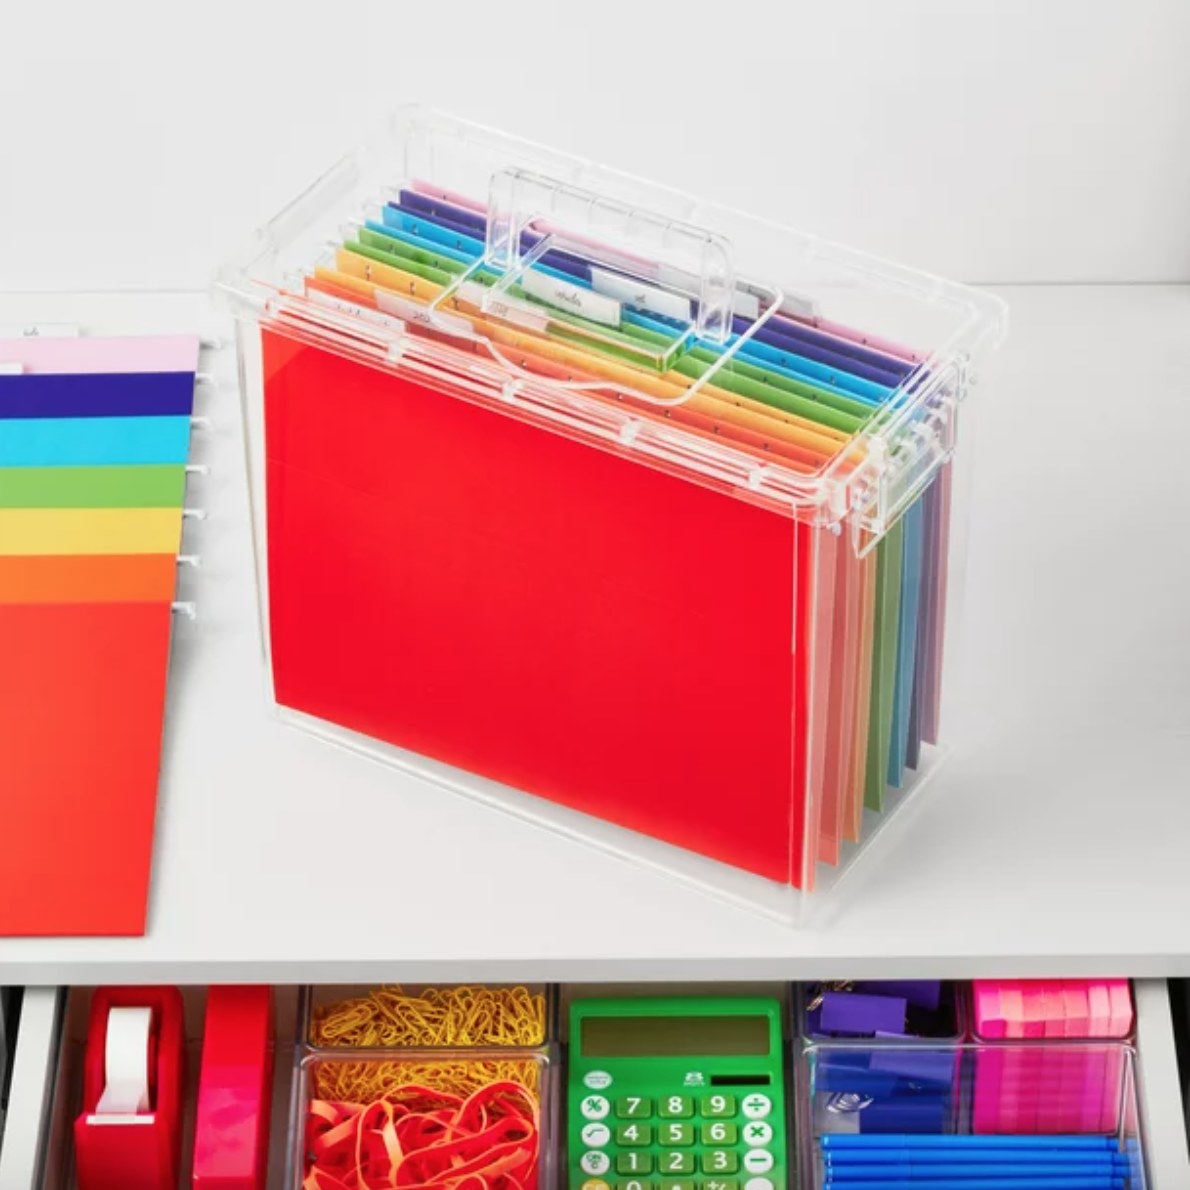 a file box with different colored filed on a desk